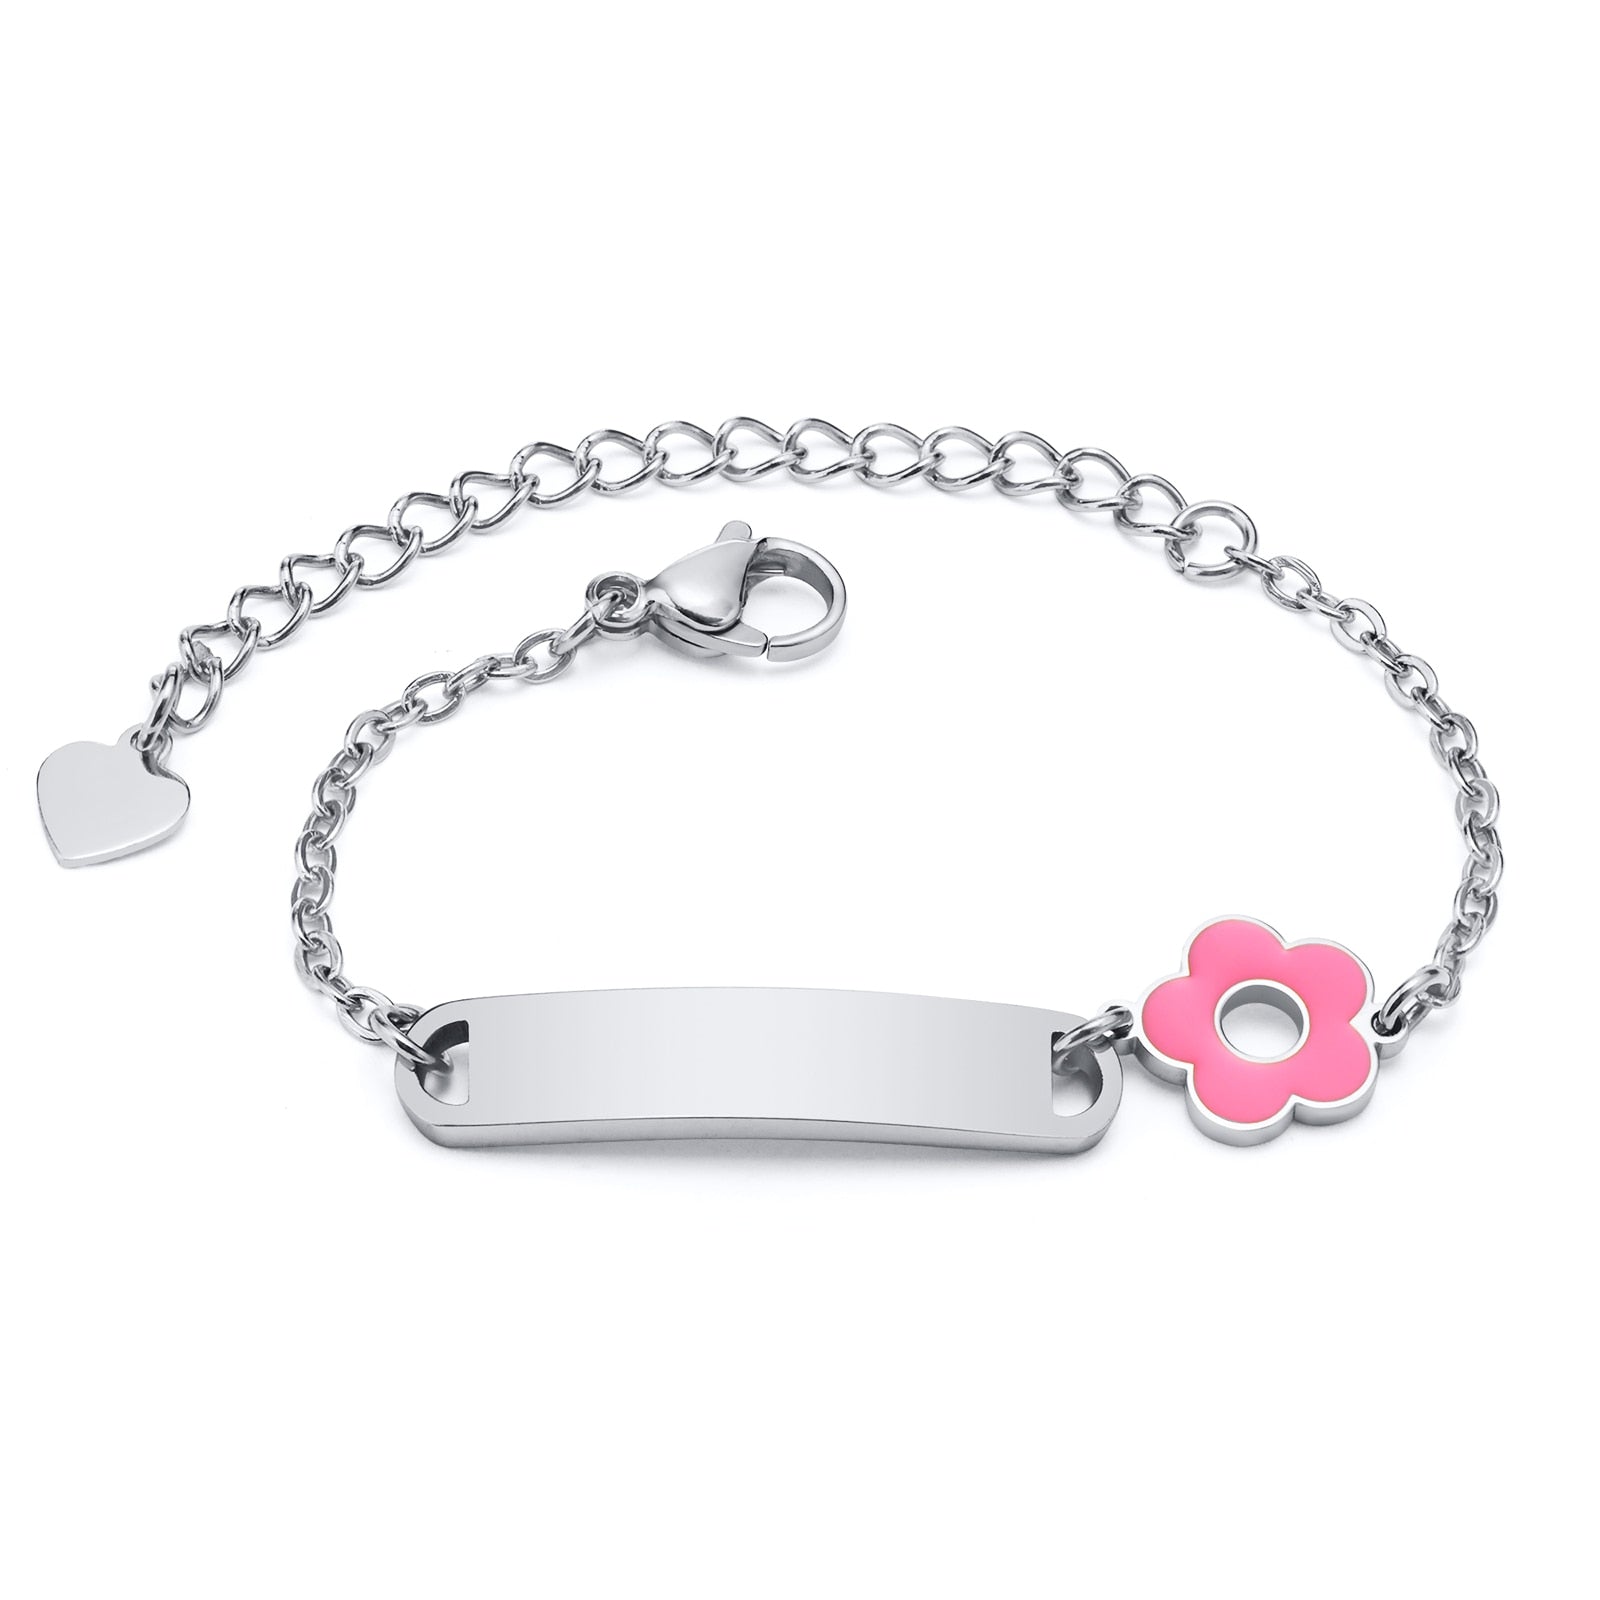 Cherish Every Moment: Personalized Baby Name Bracelet with Cute Flower Detail - Ideal Gift for Girls and Boys on Birthdays!